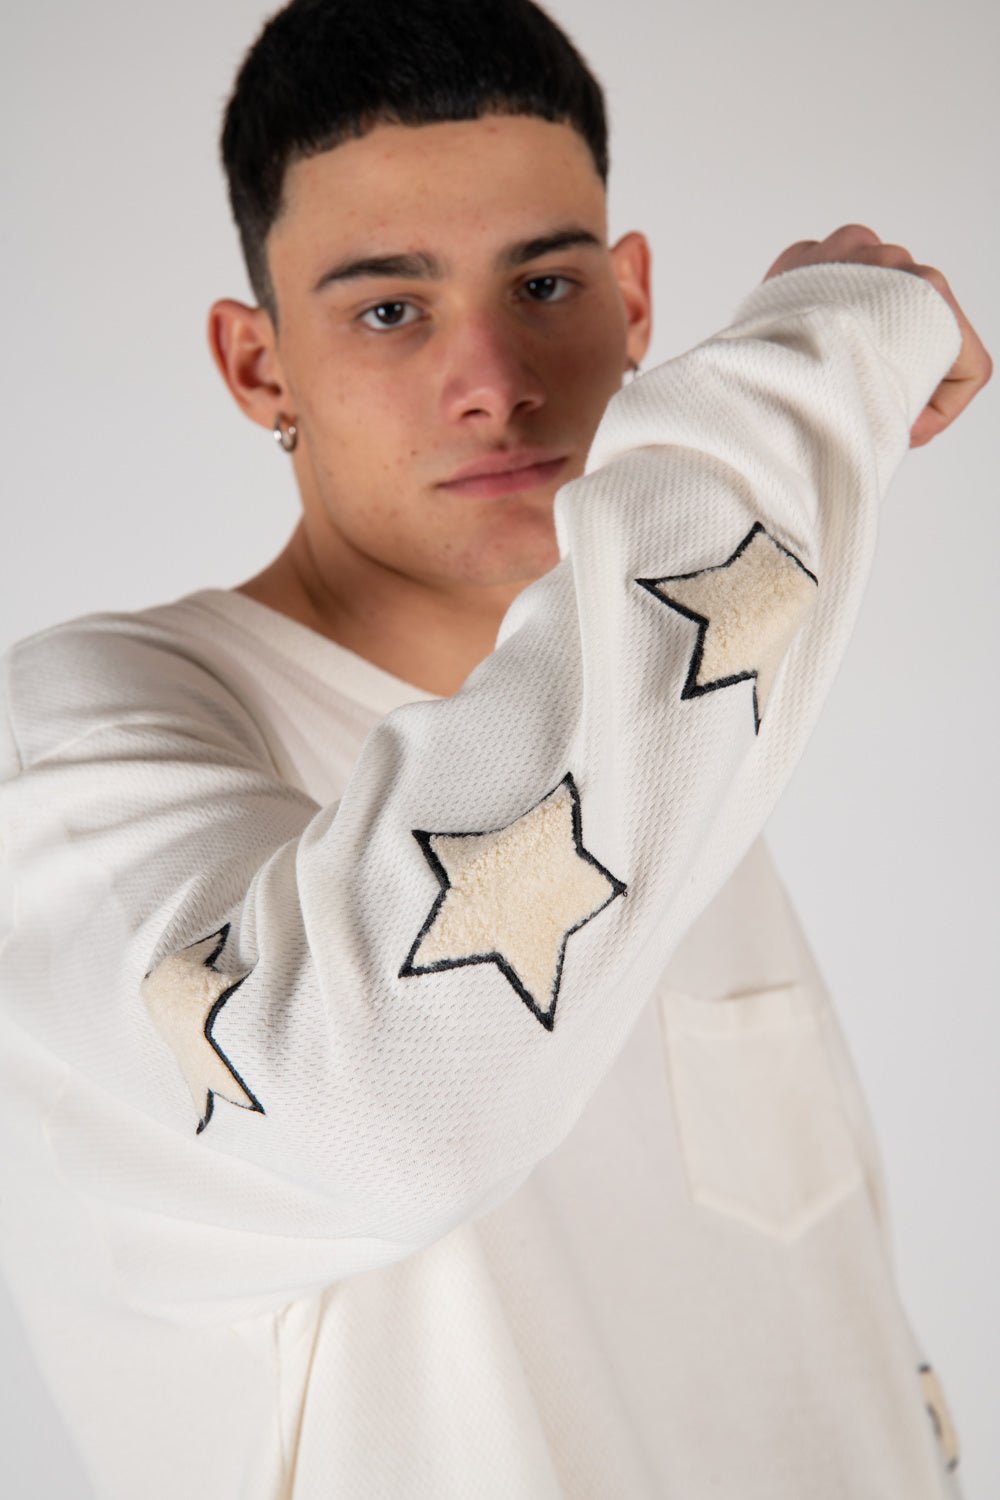 LUCKY KID - STARS Regular fit long sleeve t-shirt printed on the front. Stars patches on the sleeves. Composition: 100% Cotton HTC LOS ANGELES